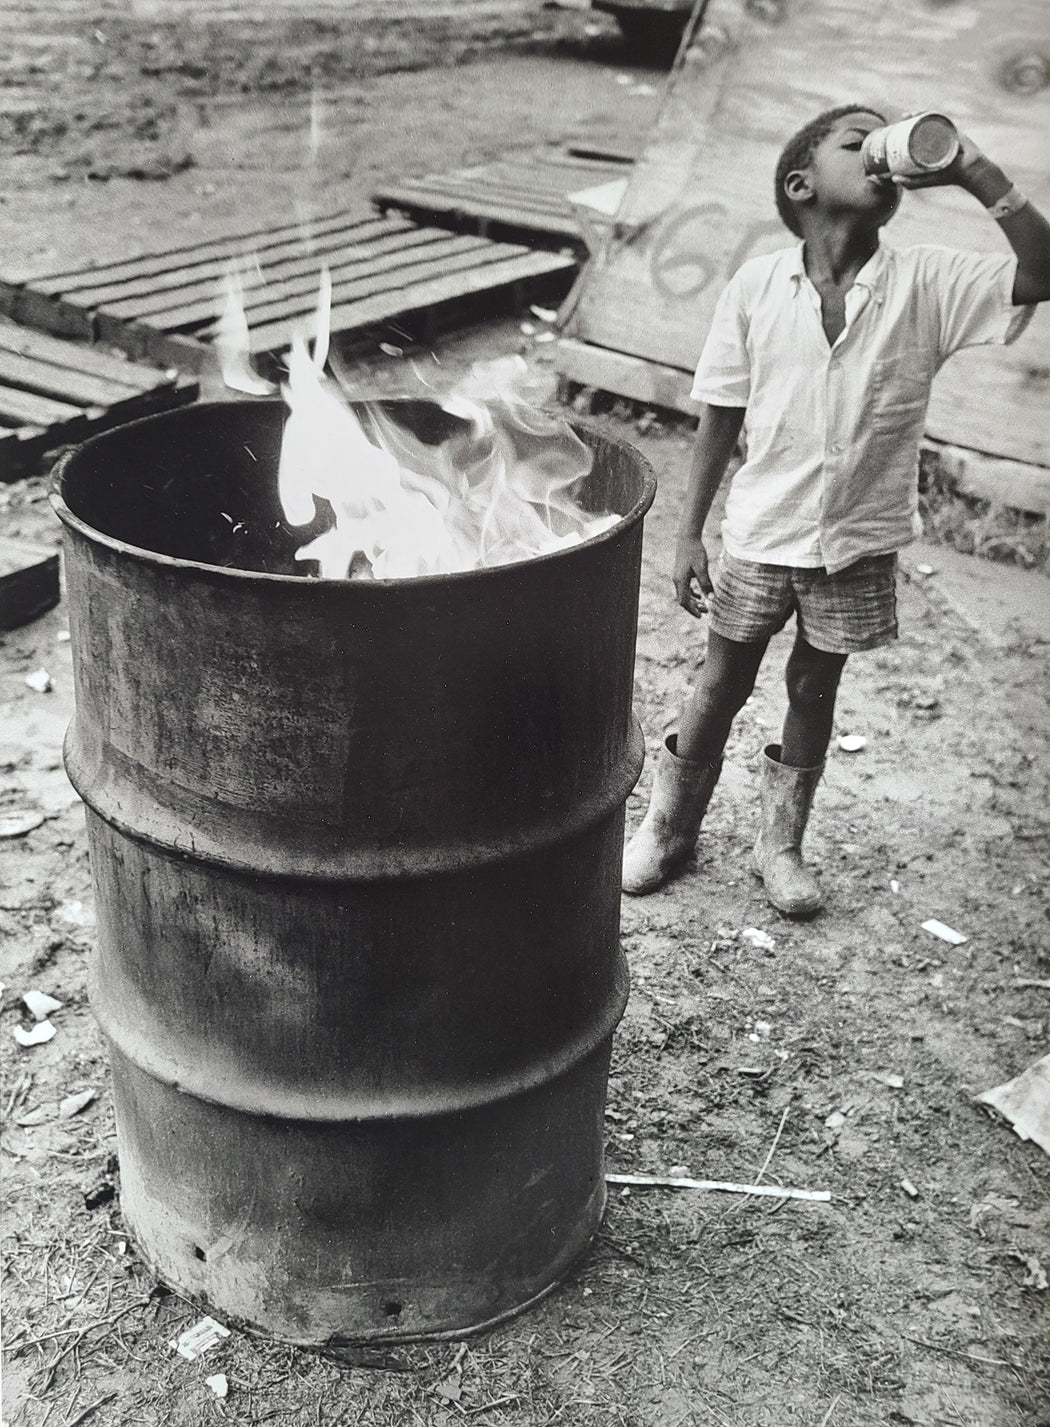 Untitled [Boy drinking next to fire in garbage can]